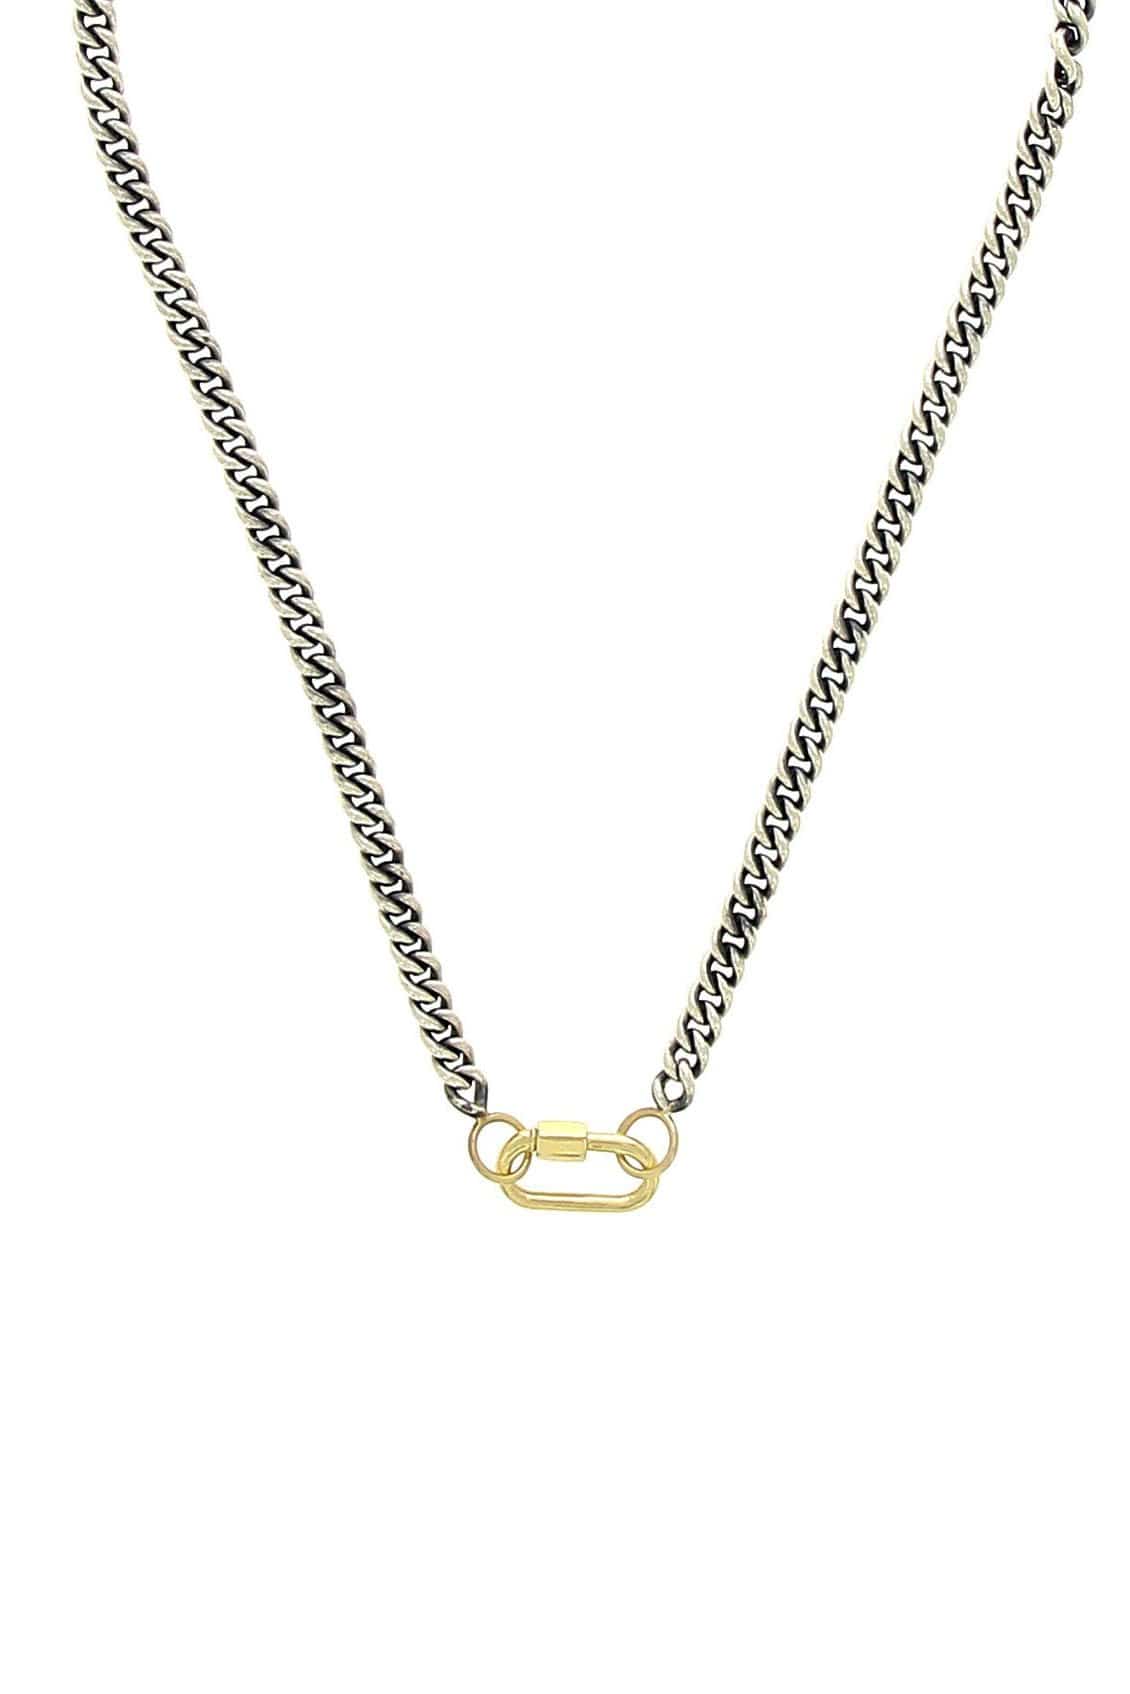 MARLA AARON-Heavy Curb Chain with Yellow Gold Loops-SILVER